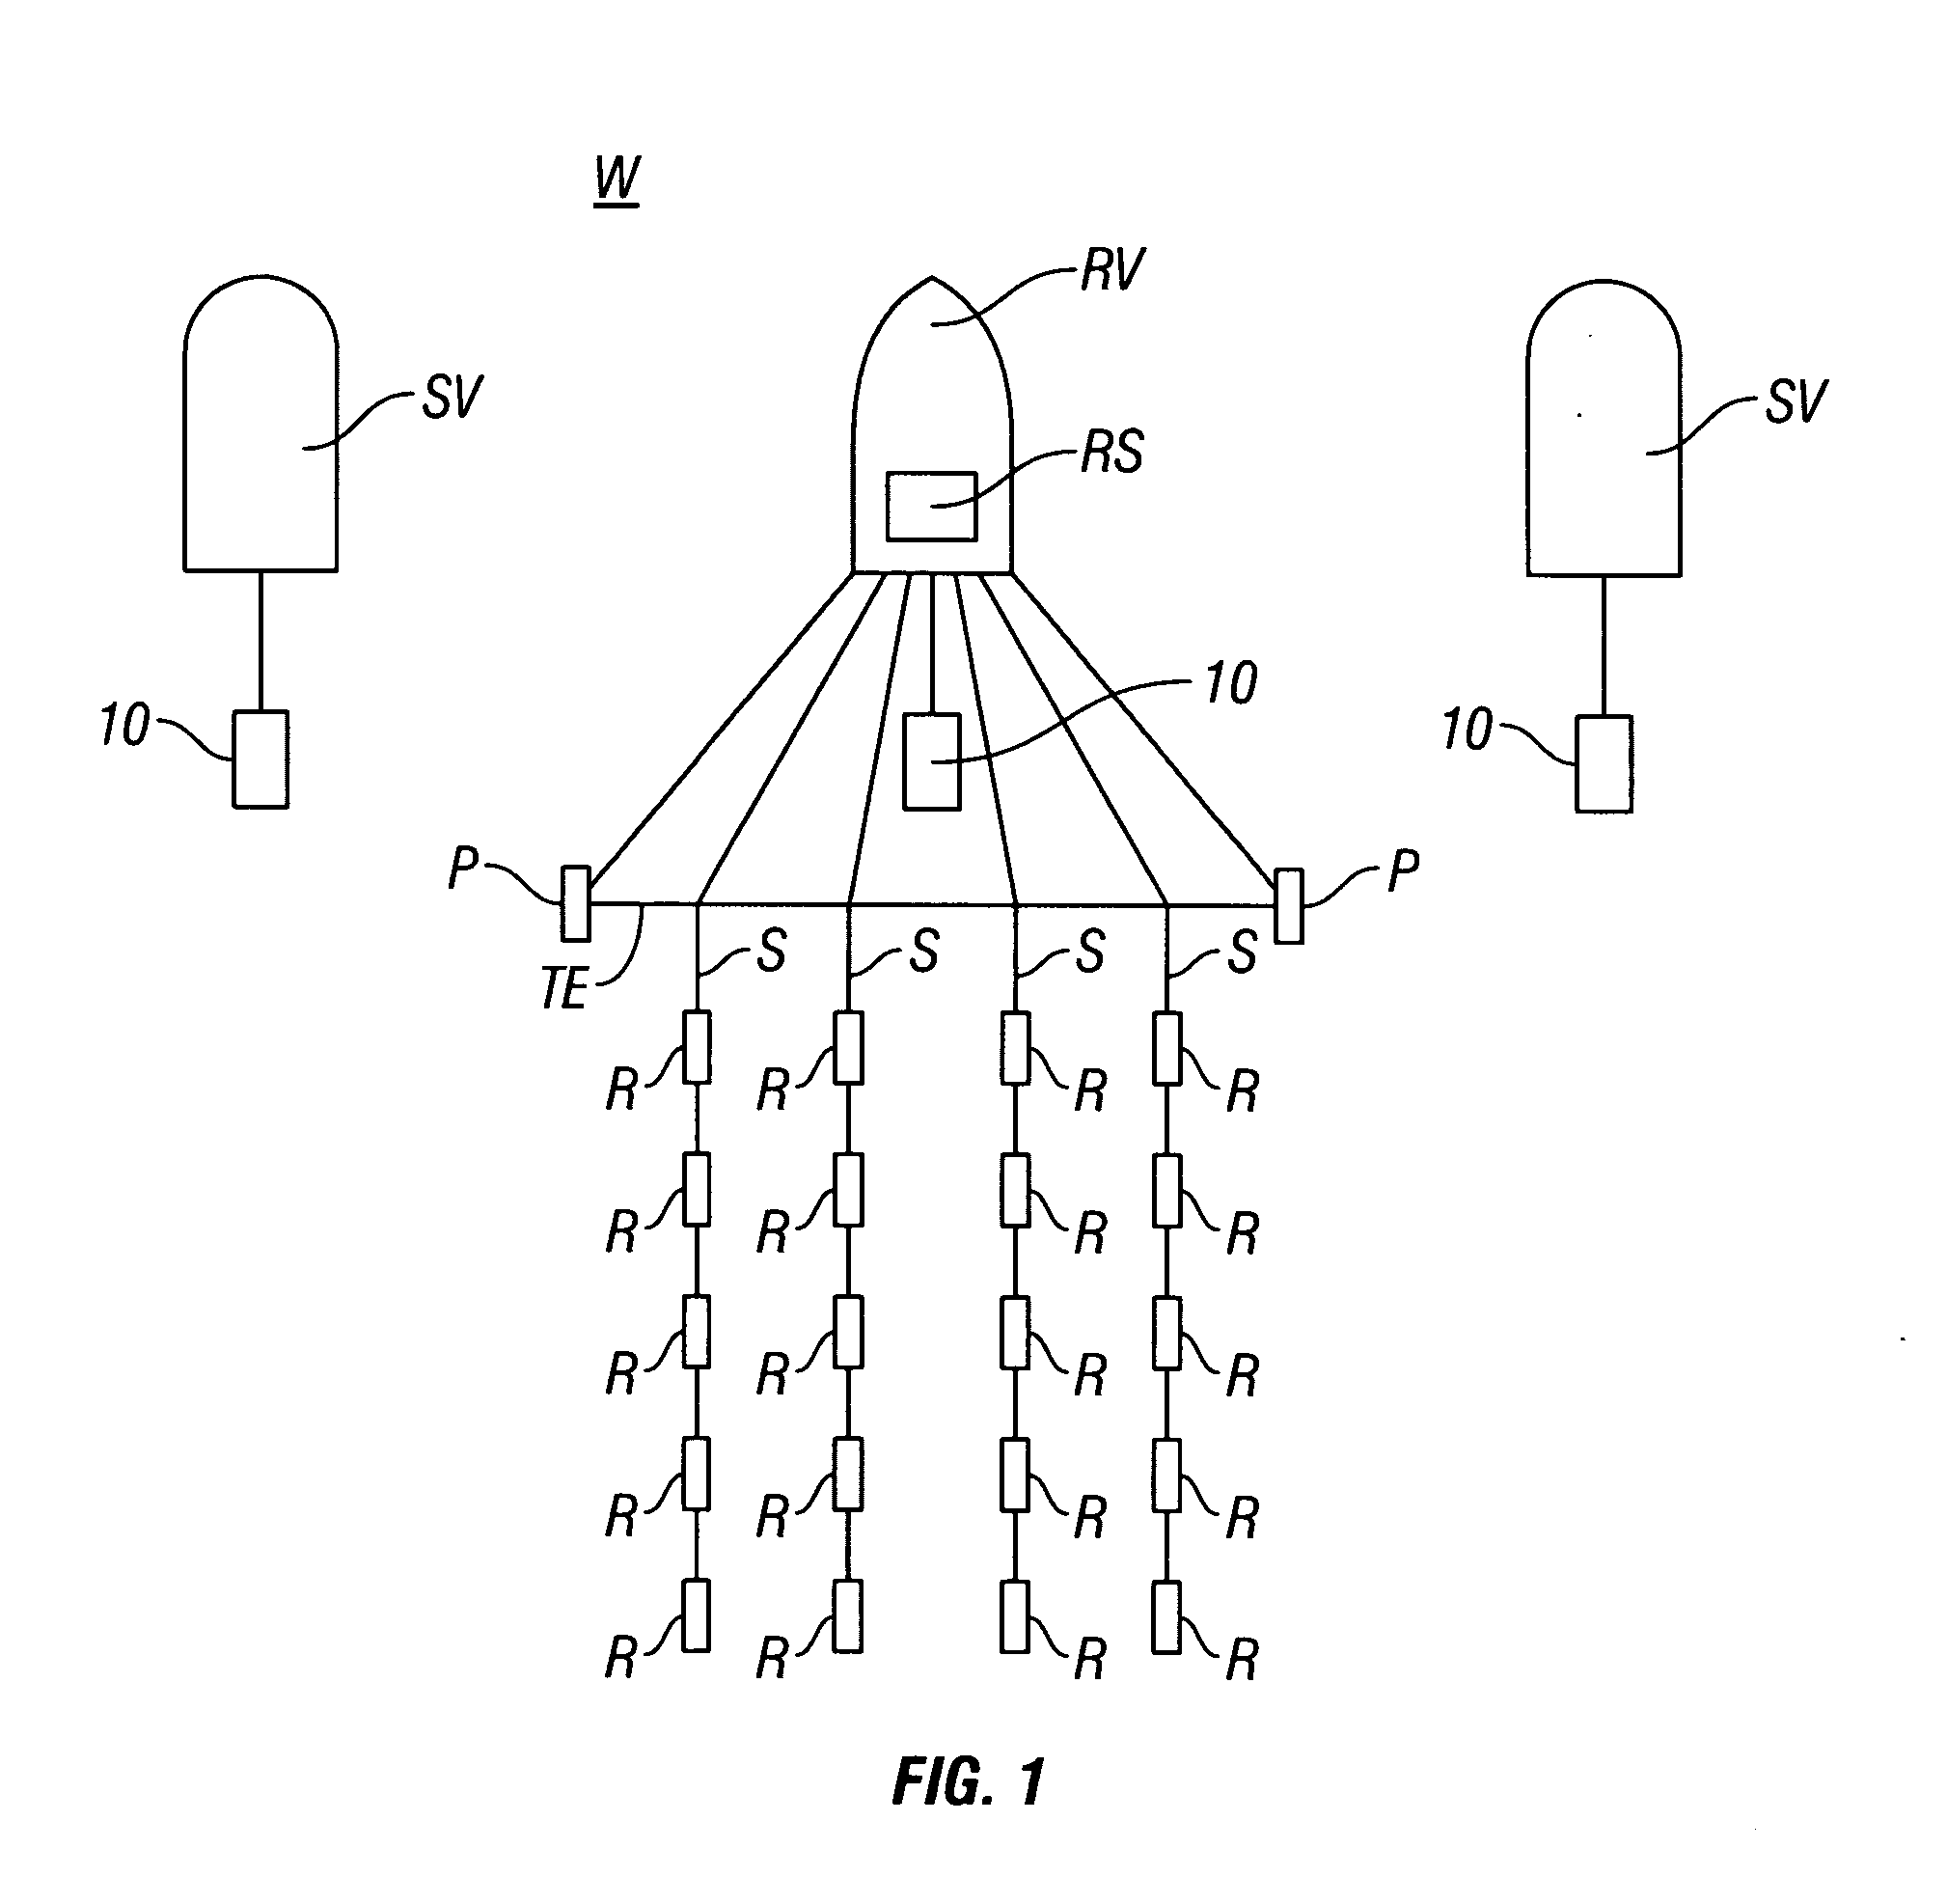 Method for generating spread spectrum driver signals for a seismic vibrator array using multiple biphase modulation operations in each driver signal chip